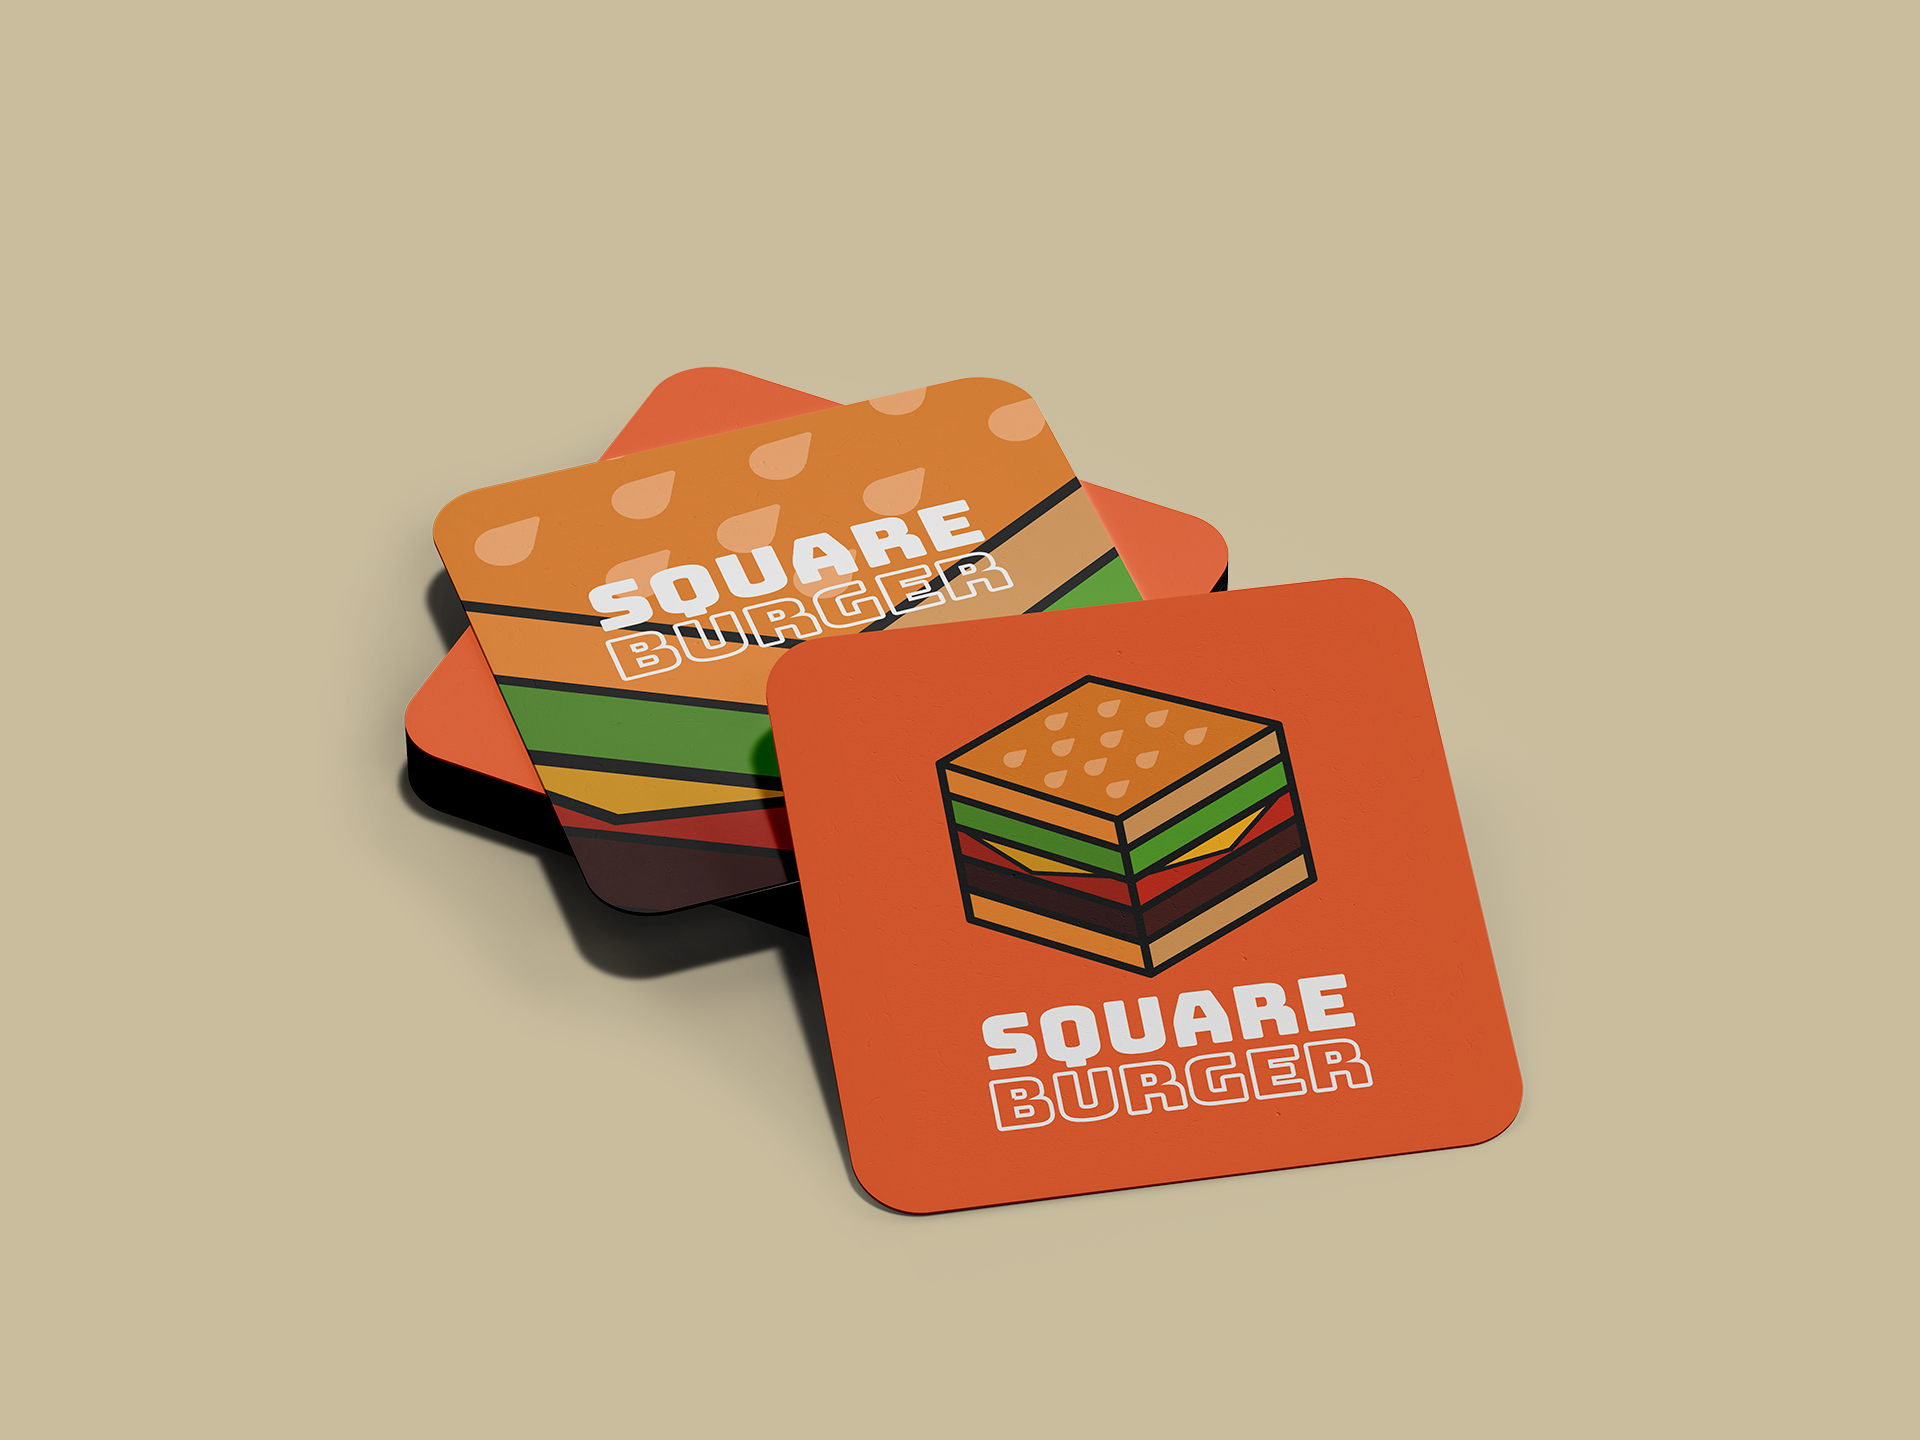 A pile of drinks coasters displaying the Square Burger branding.